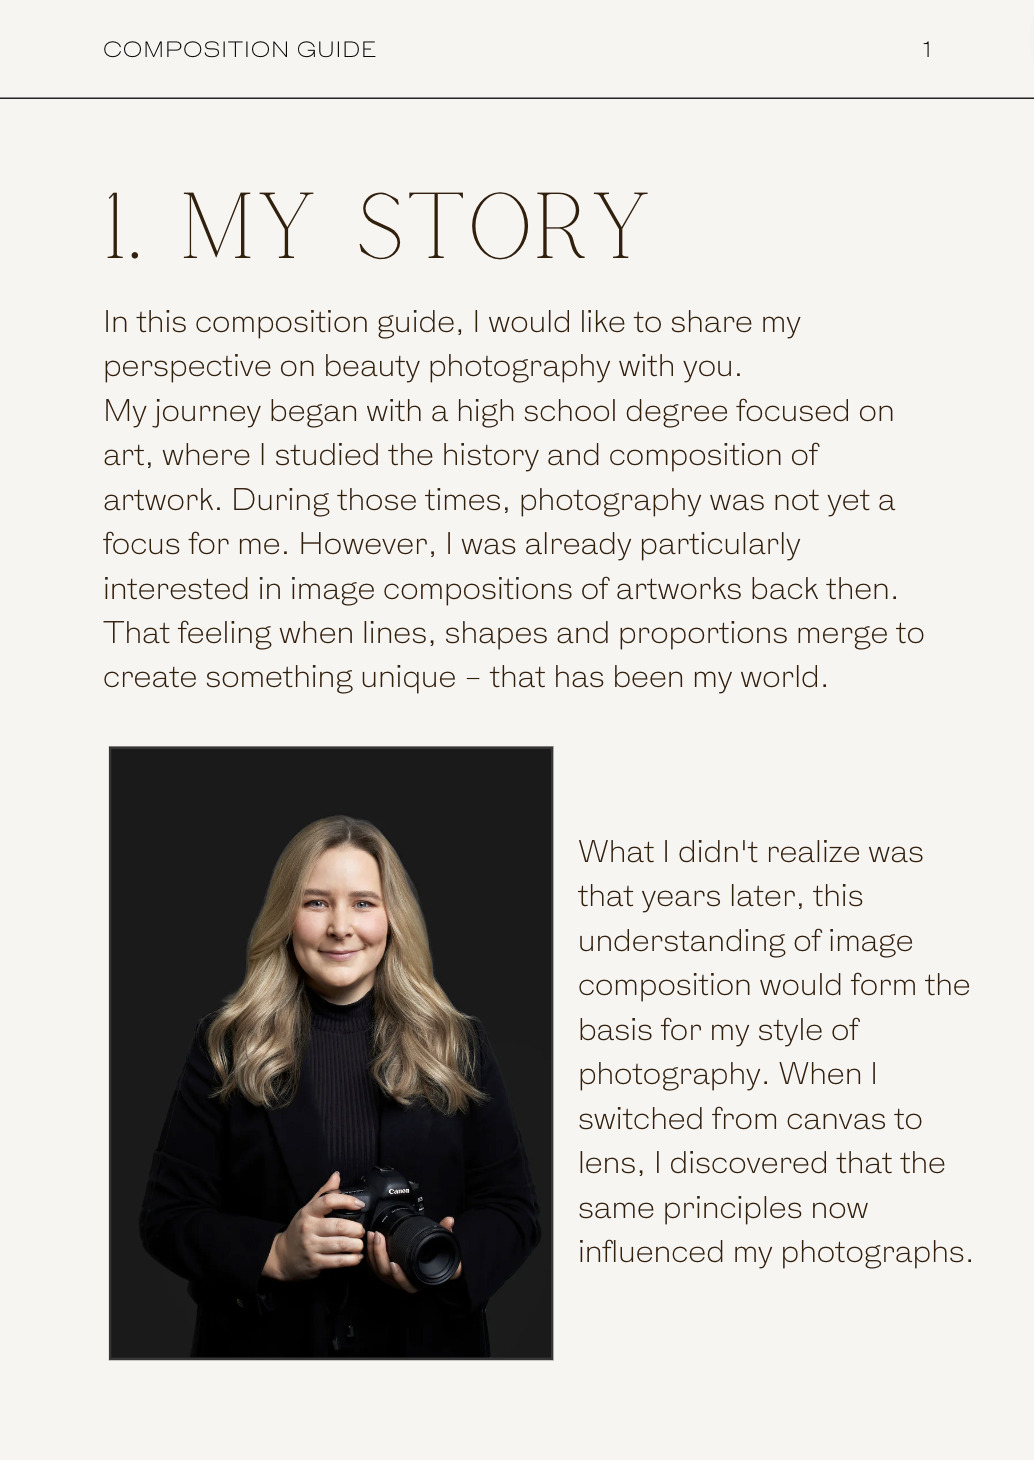 Natascha Lindemann - My Composition Rules for Beauty Photographer - Page 2 - My Story - PDF Guide